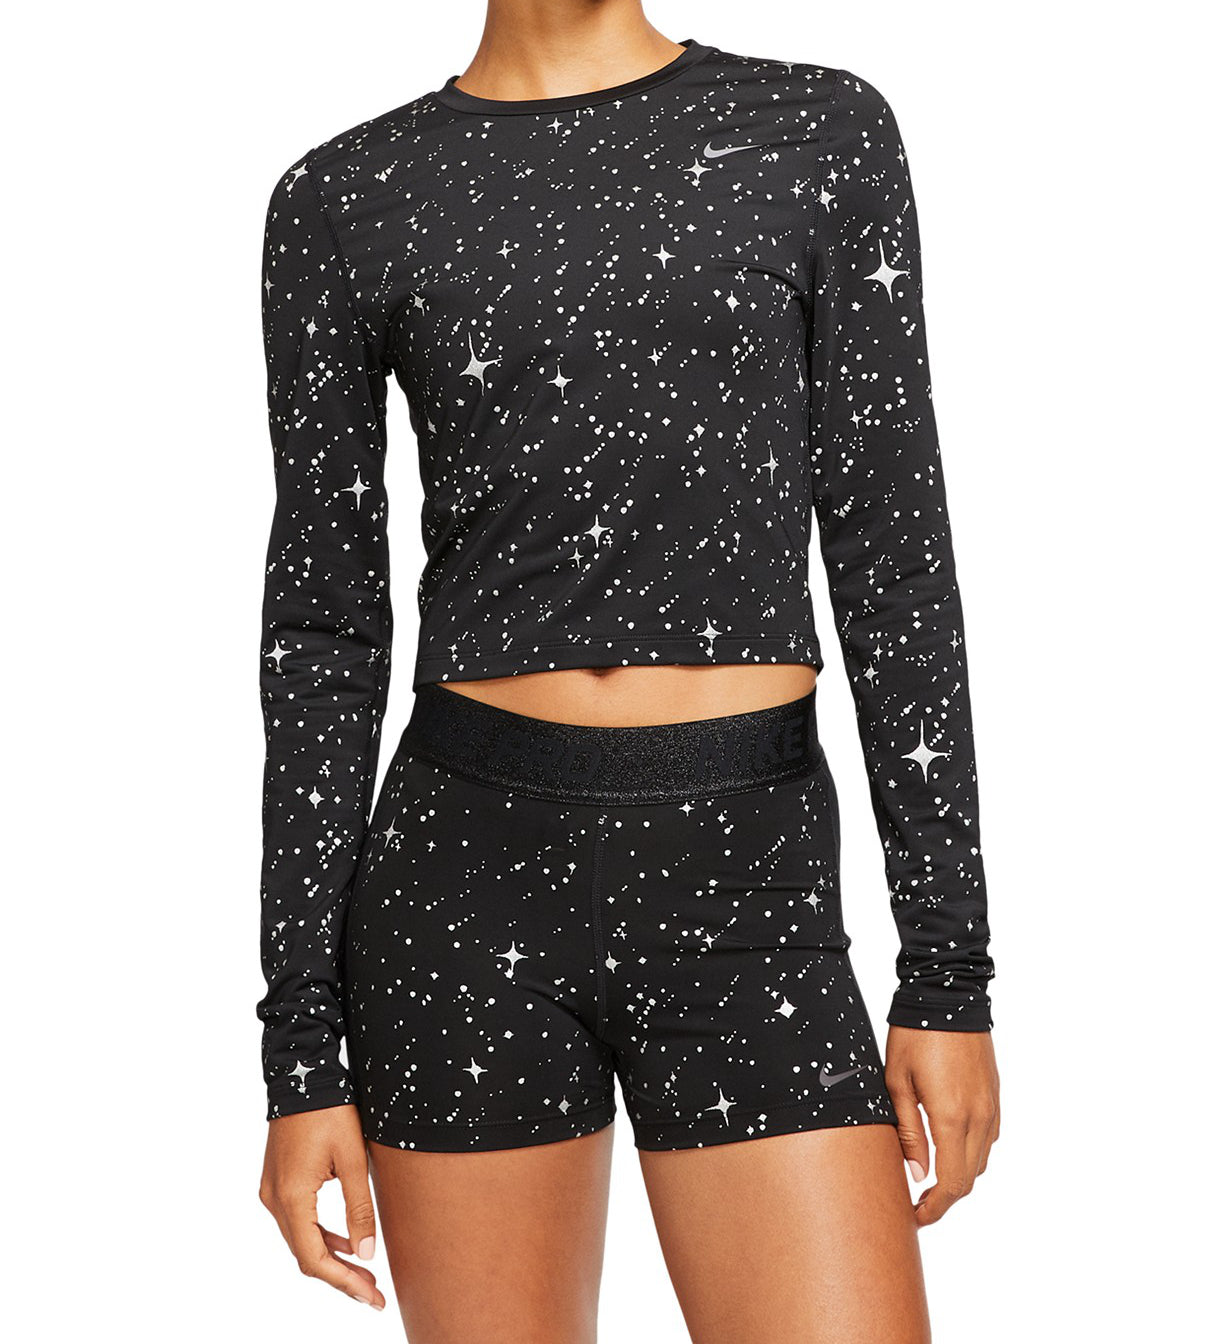 Nike Womens Starry Night Fitness Training Crop Top - image 1 of 3